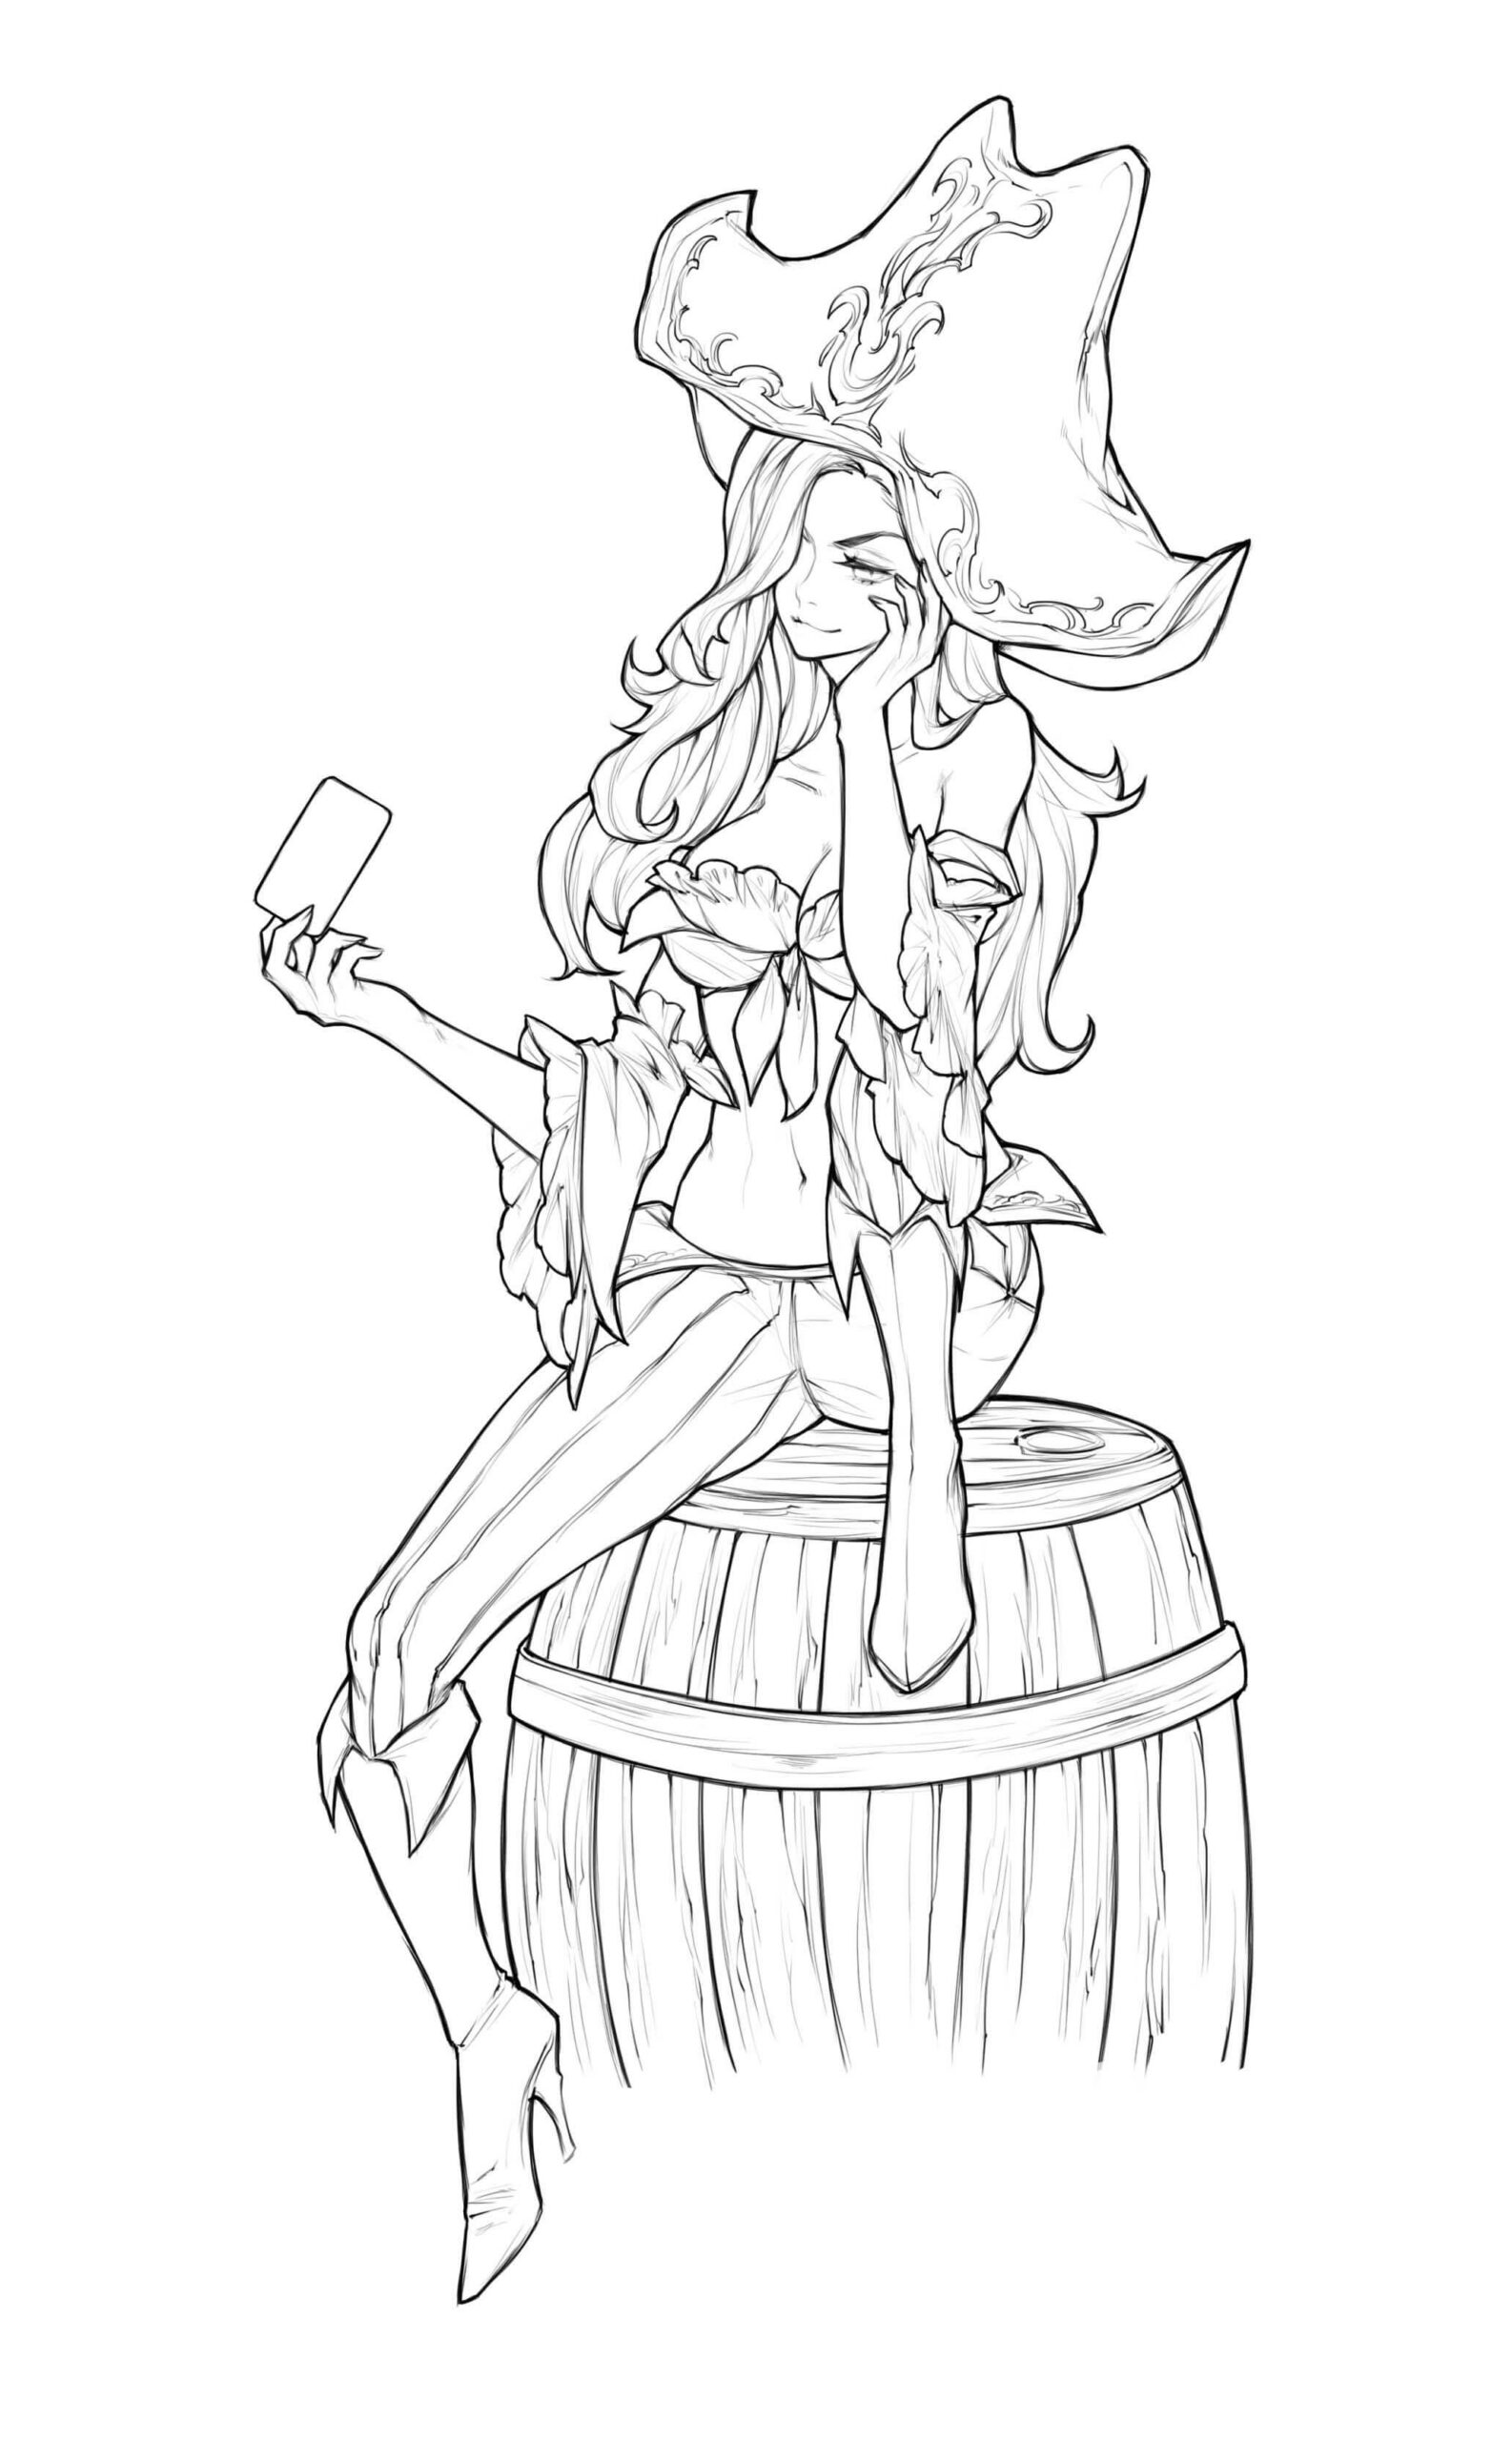 League of Legends Miss Fortune coloring page